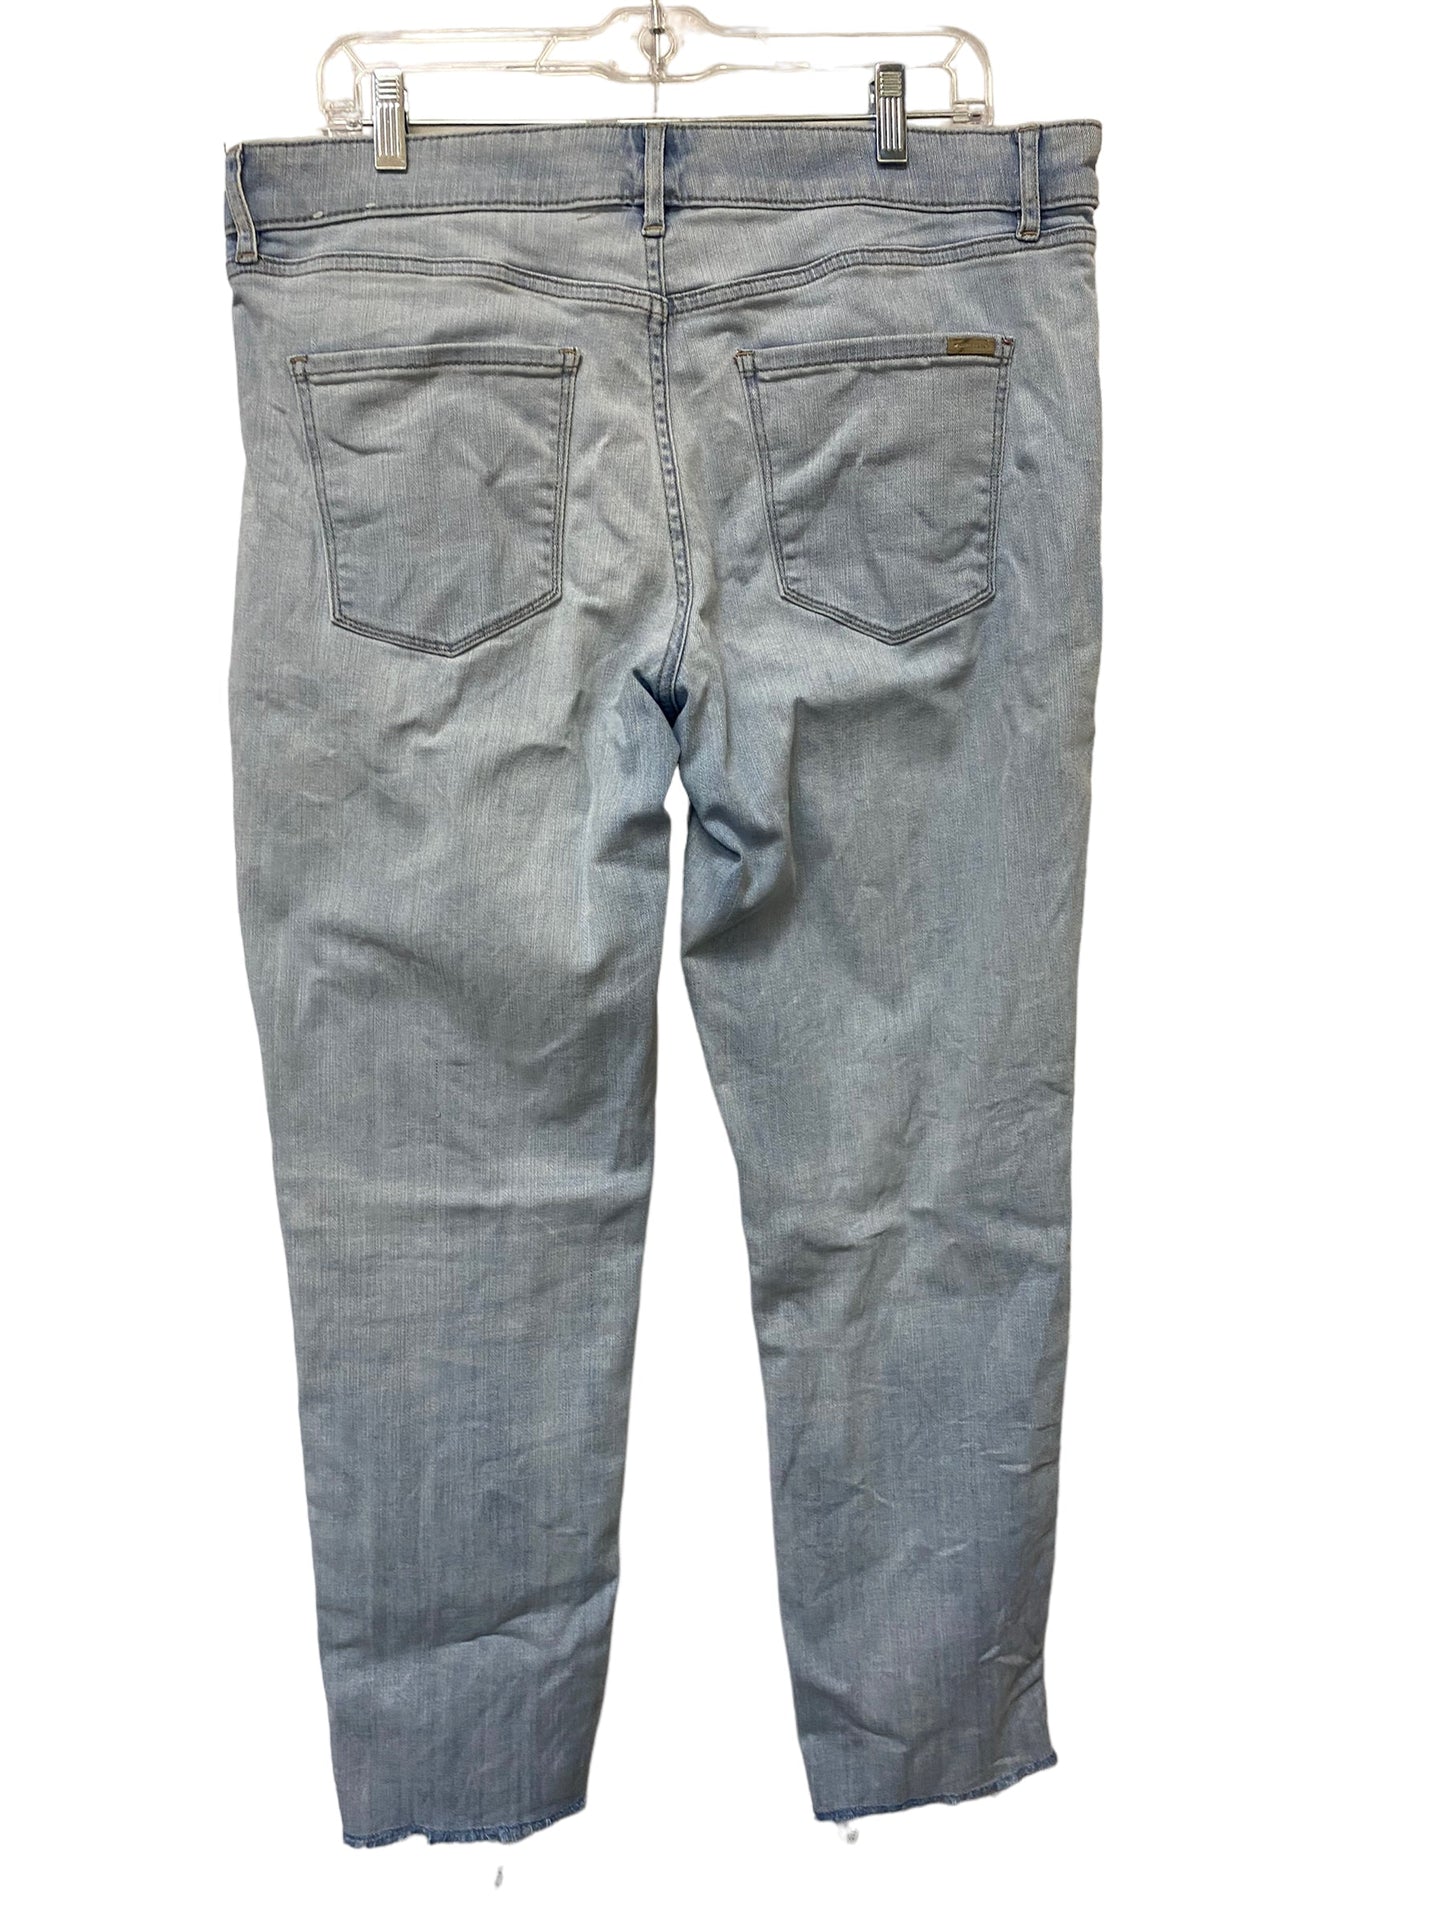 Jeans Relaxed/boyfriend By White House Black Market  Size: 12